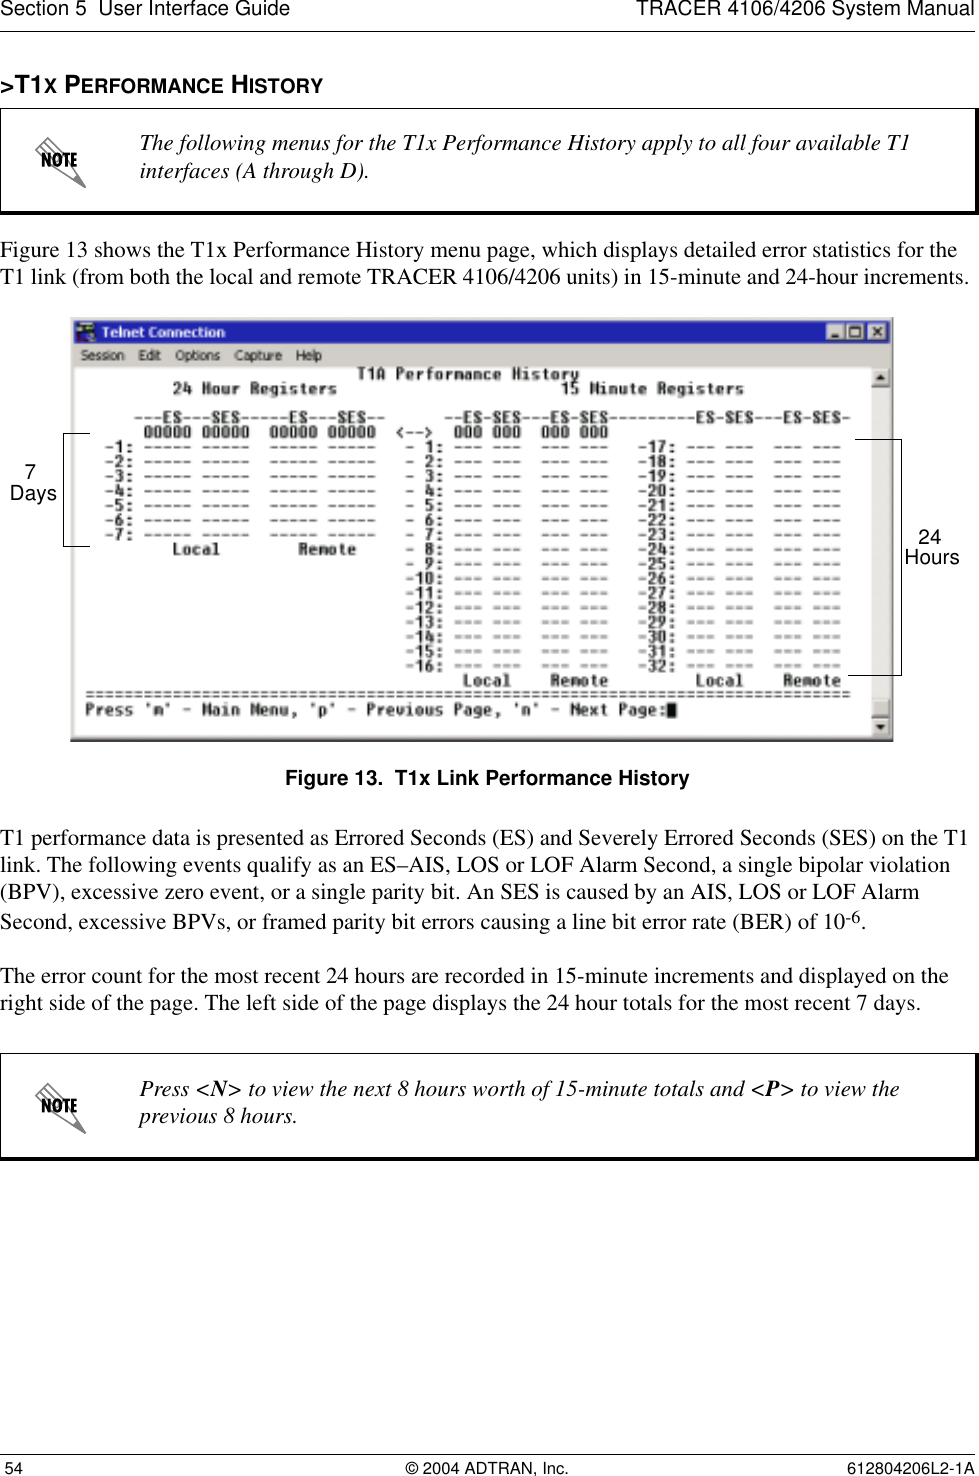 Section 5  User Interface Guide TRACER 4106/4206 System Manual 54 © 2004 ADTRAN, Inc. 612804206L2-1A&gt;T1X PERFORMANCE HISTORYFigure 13 shows the T1x Performance History menu page, which displays detailed error statistics for the T1 link (from both the local and remote TRACER 4106/4206 units) in 15-minute and 24-hour increments. Figure 13.  T1x Link Performance HistoryT1 performance data is presented as Errored Seconds (ES) and Severely Errored Seconds (SES) on the T1 link. The following events qualify as an ES–AIS, LOS or LOF Alarm Second, a single bipolar violation (BPV), excessive zero event, or a single parity bit. An SES is caused by an AIS, LOS or LOF Alarm Second, excessive BPVs, or framed parity bit errors causing a line bit error rate (BER) of 10-6.The error count for the most recent 24 hours are recorded in 15-minute increments and displayed on the right side of the page. The left side of the page displays the 24 hour totals for the most recent 7 days.The following menus for the T1x Performance History apply to all four available T1 interfaces (A through D).Press &lt;N&gt; to view the next 8 hours worth of 15-minute totals and &lt;P&gt; to view the previous 8 hours.24 Hours7 Days